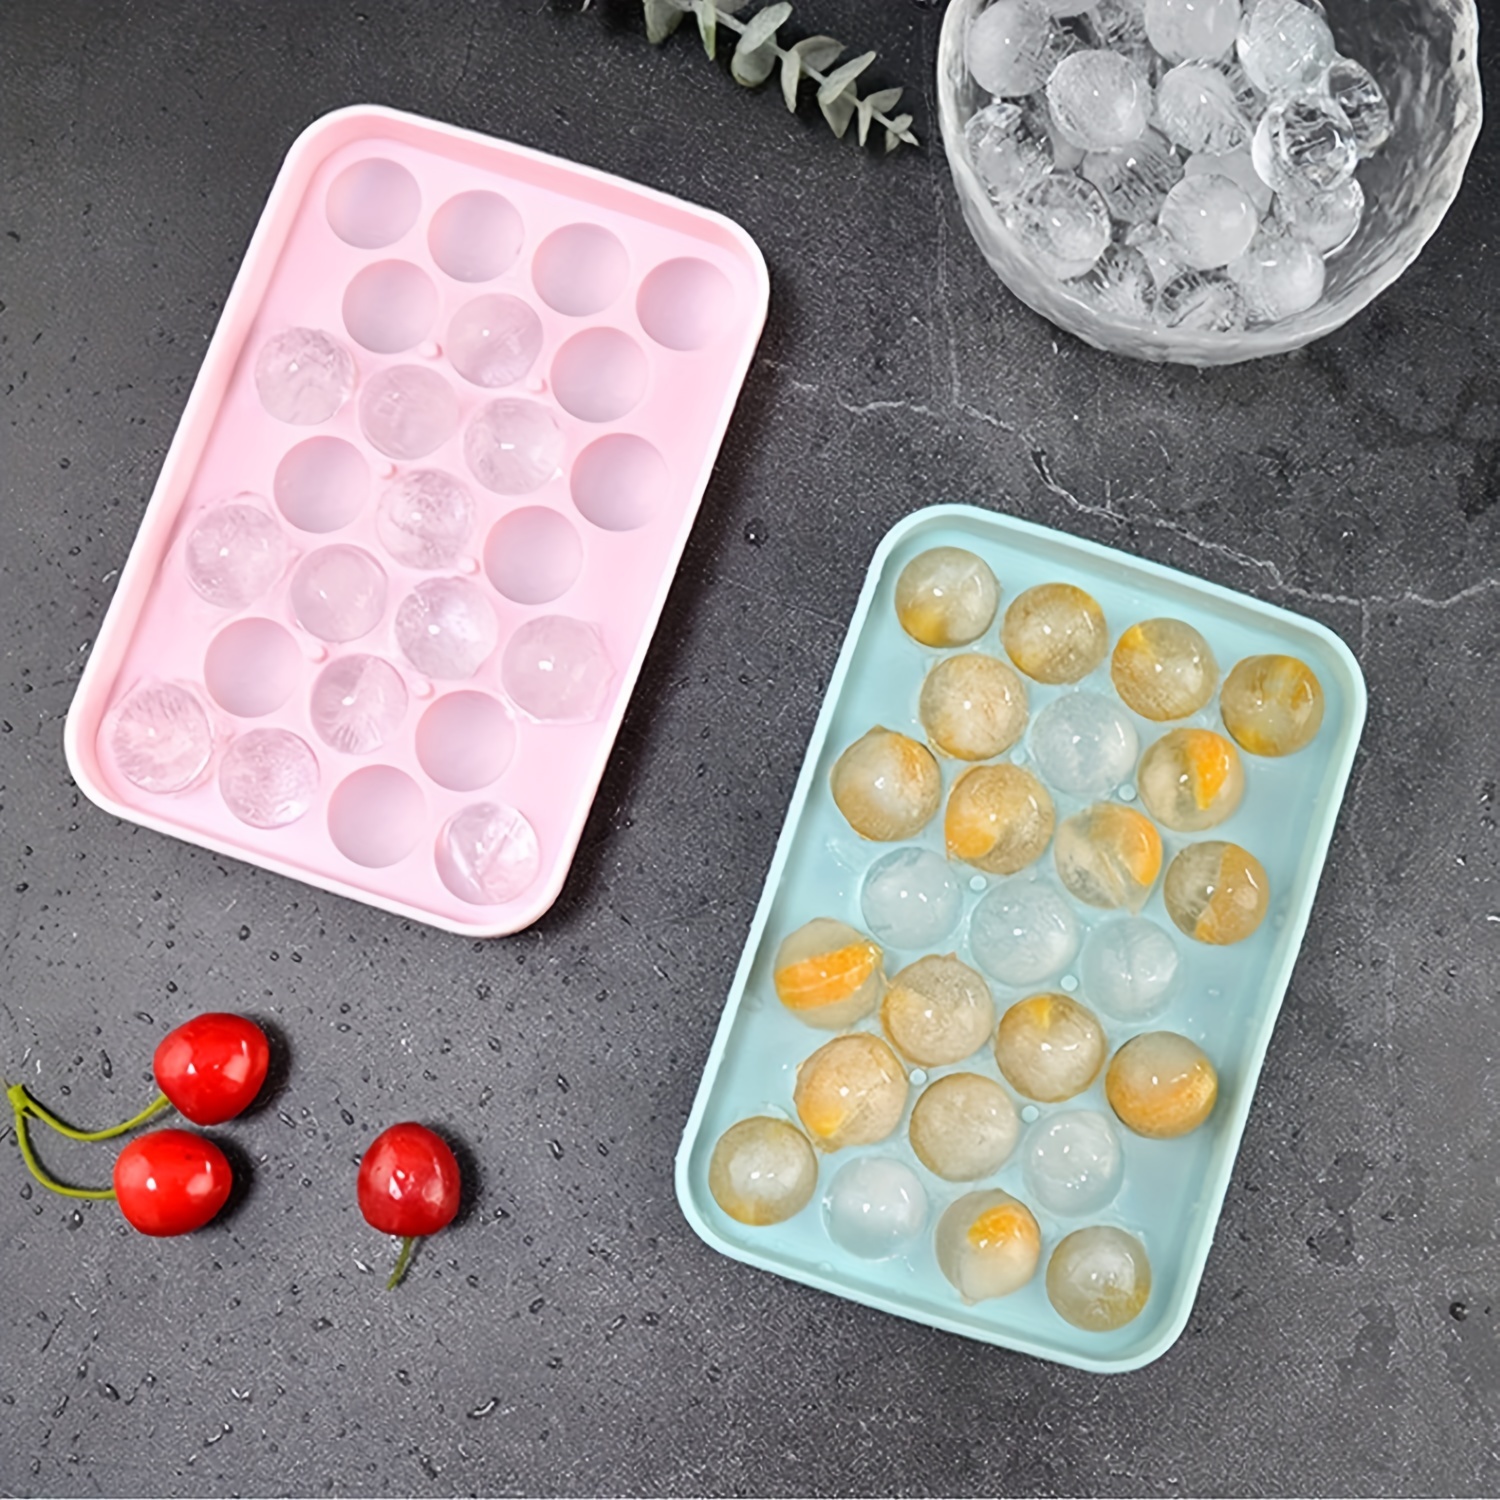 1pc Silicon Round Ice Cube Tray Mold For Homemade Ice Making In